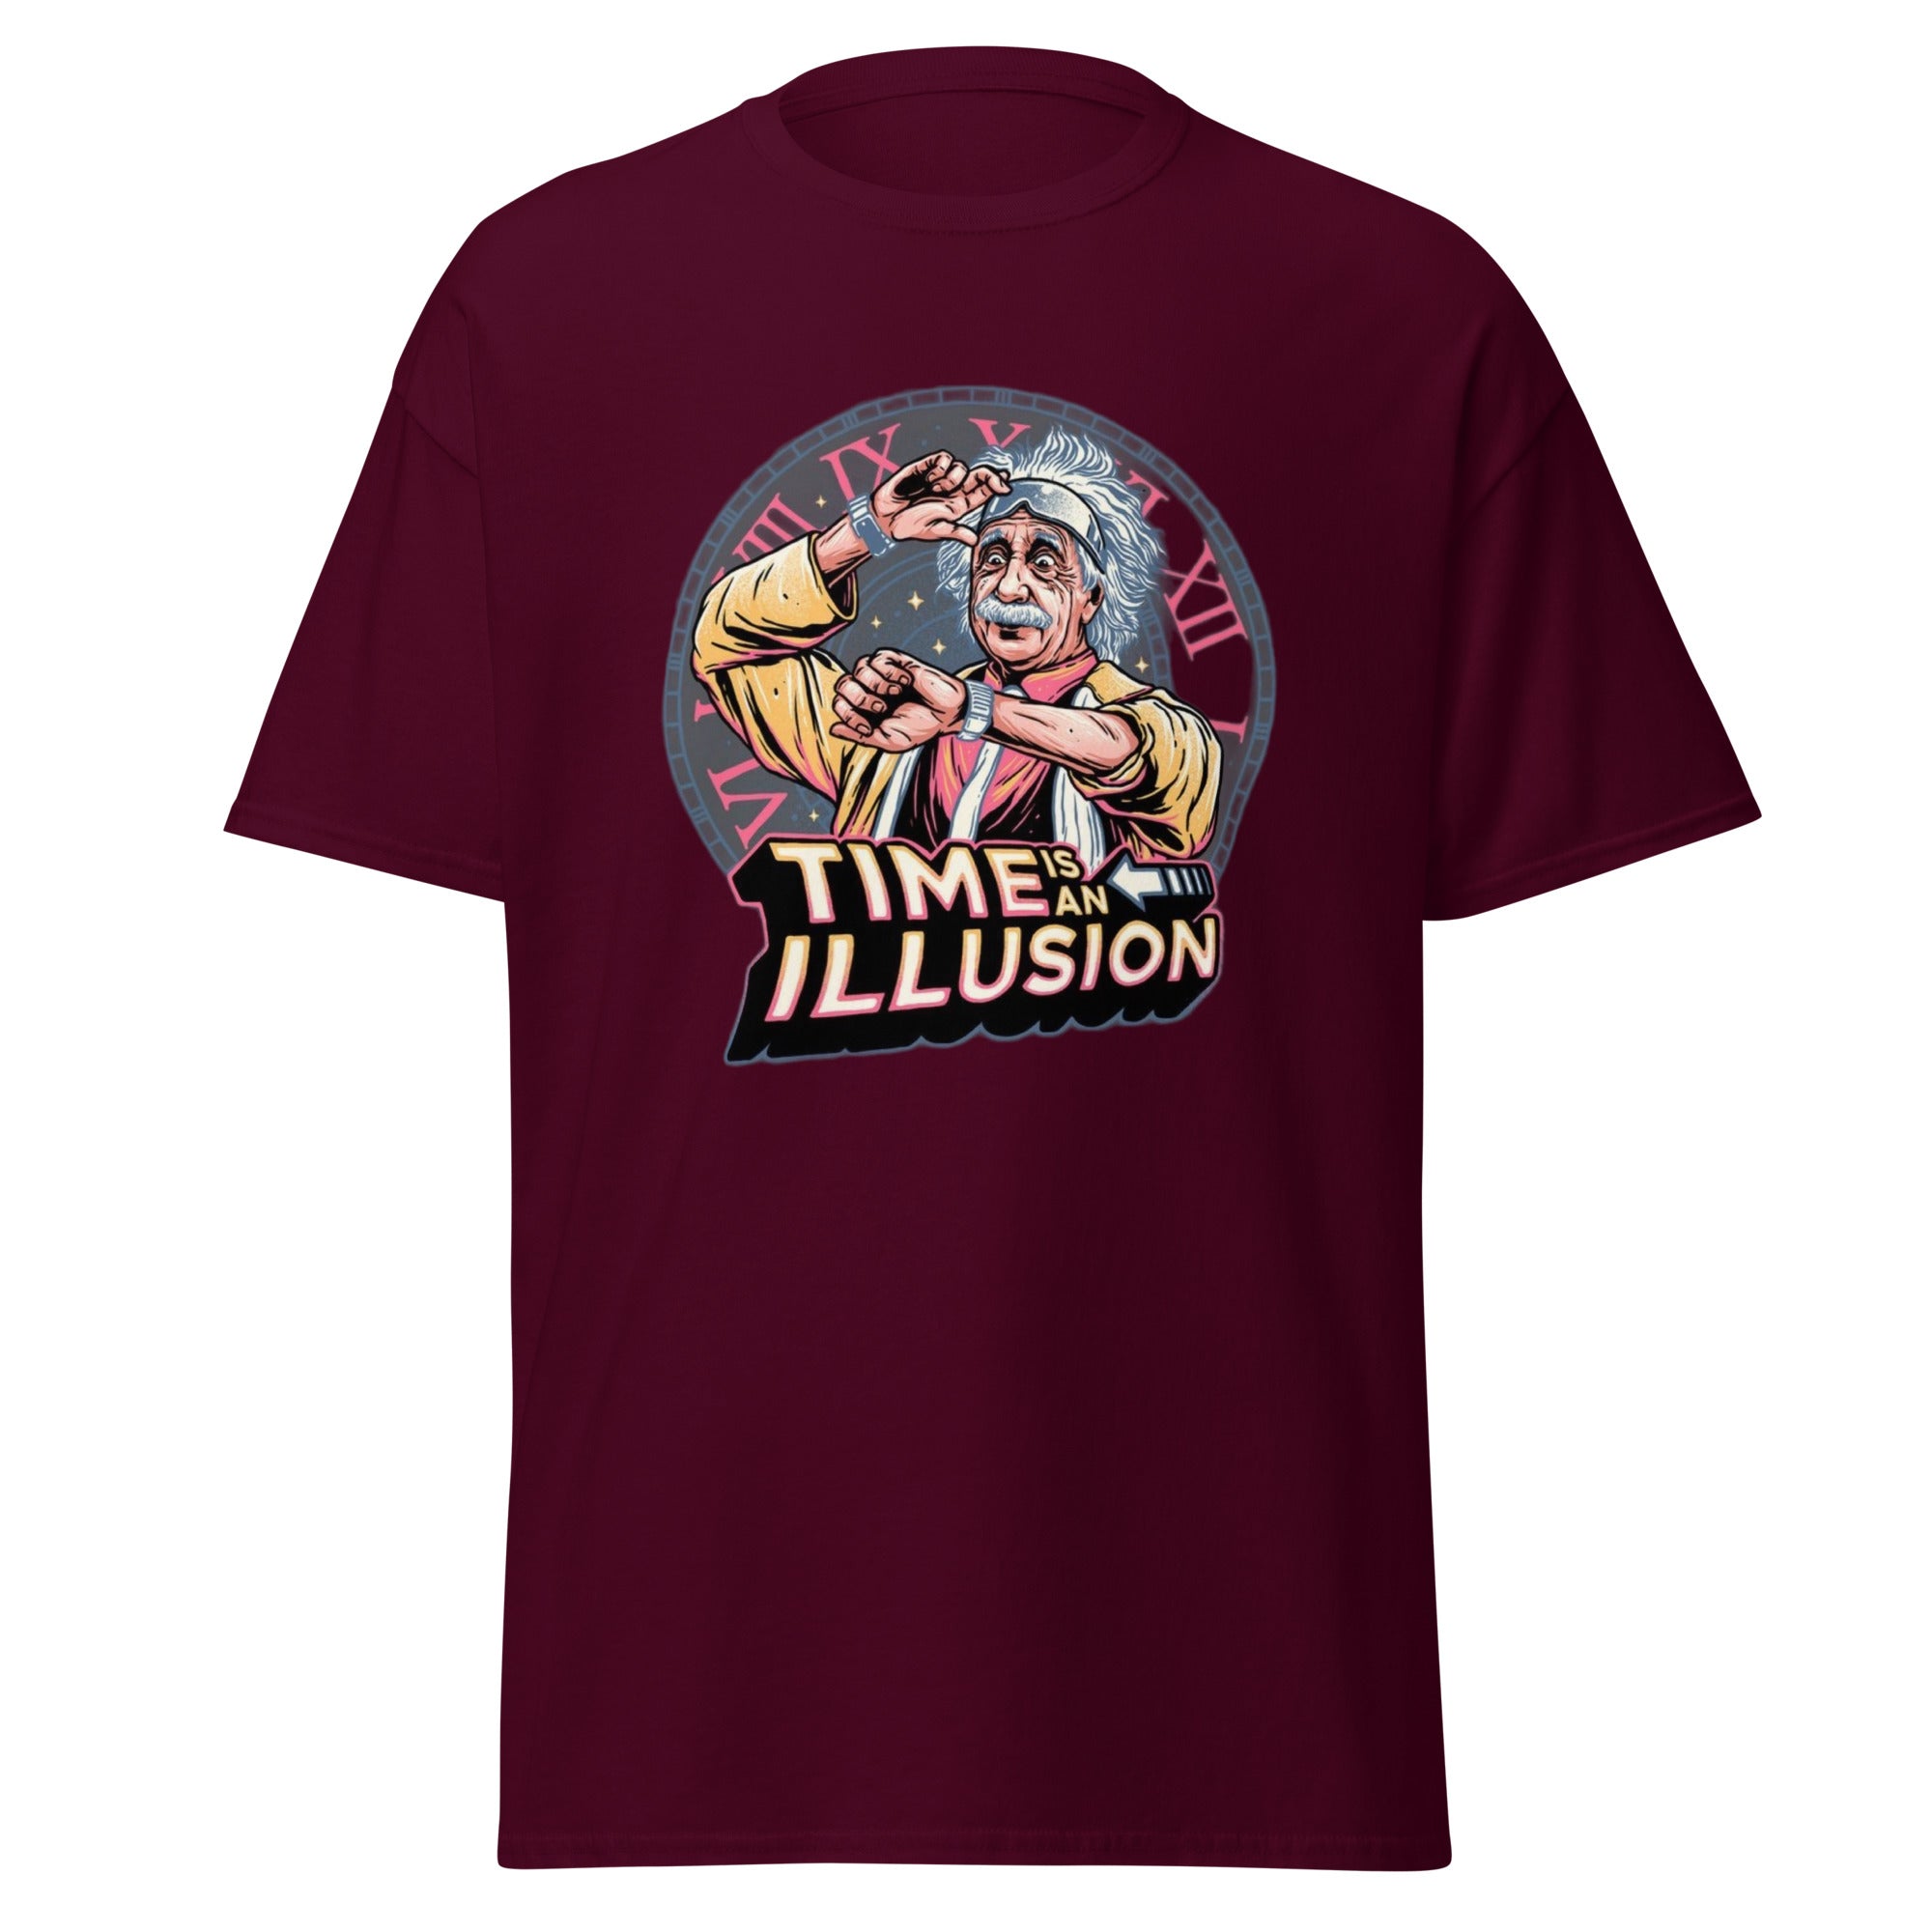 "Time is an Illusion" Men's classic tee